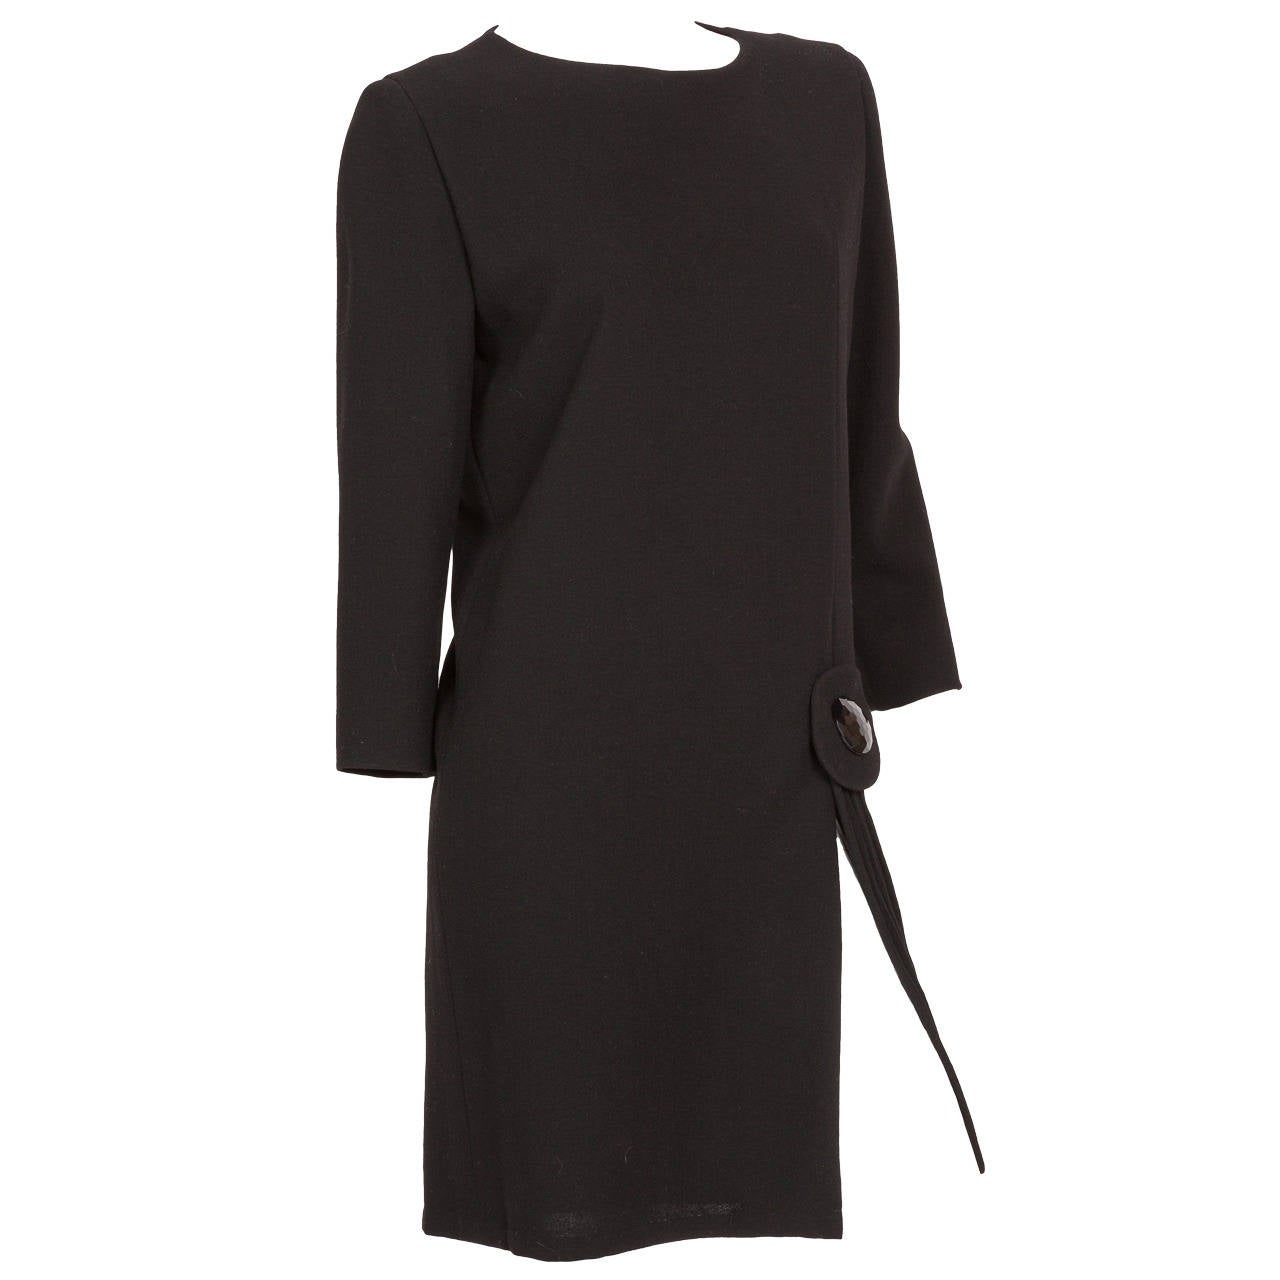 Pierre Cardin Haute Couture Black Wool Cocktail Dress w/Thigh High Slit ...